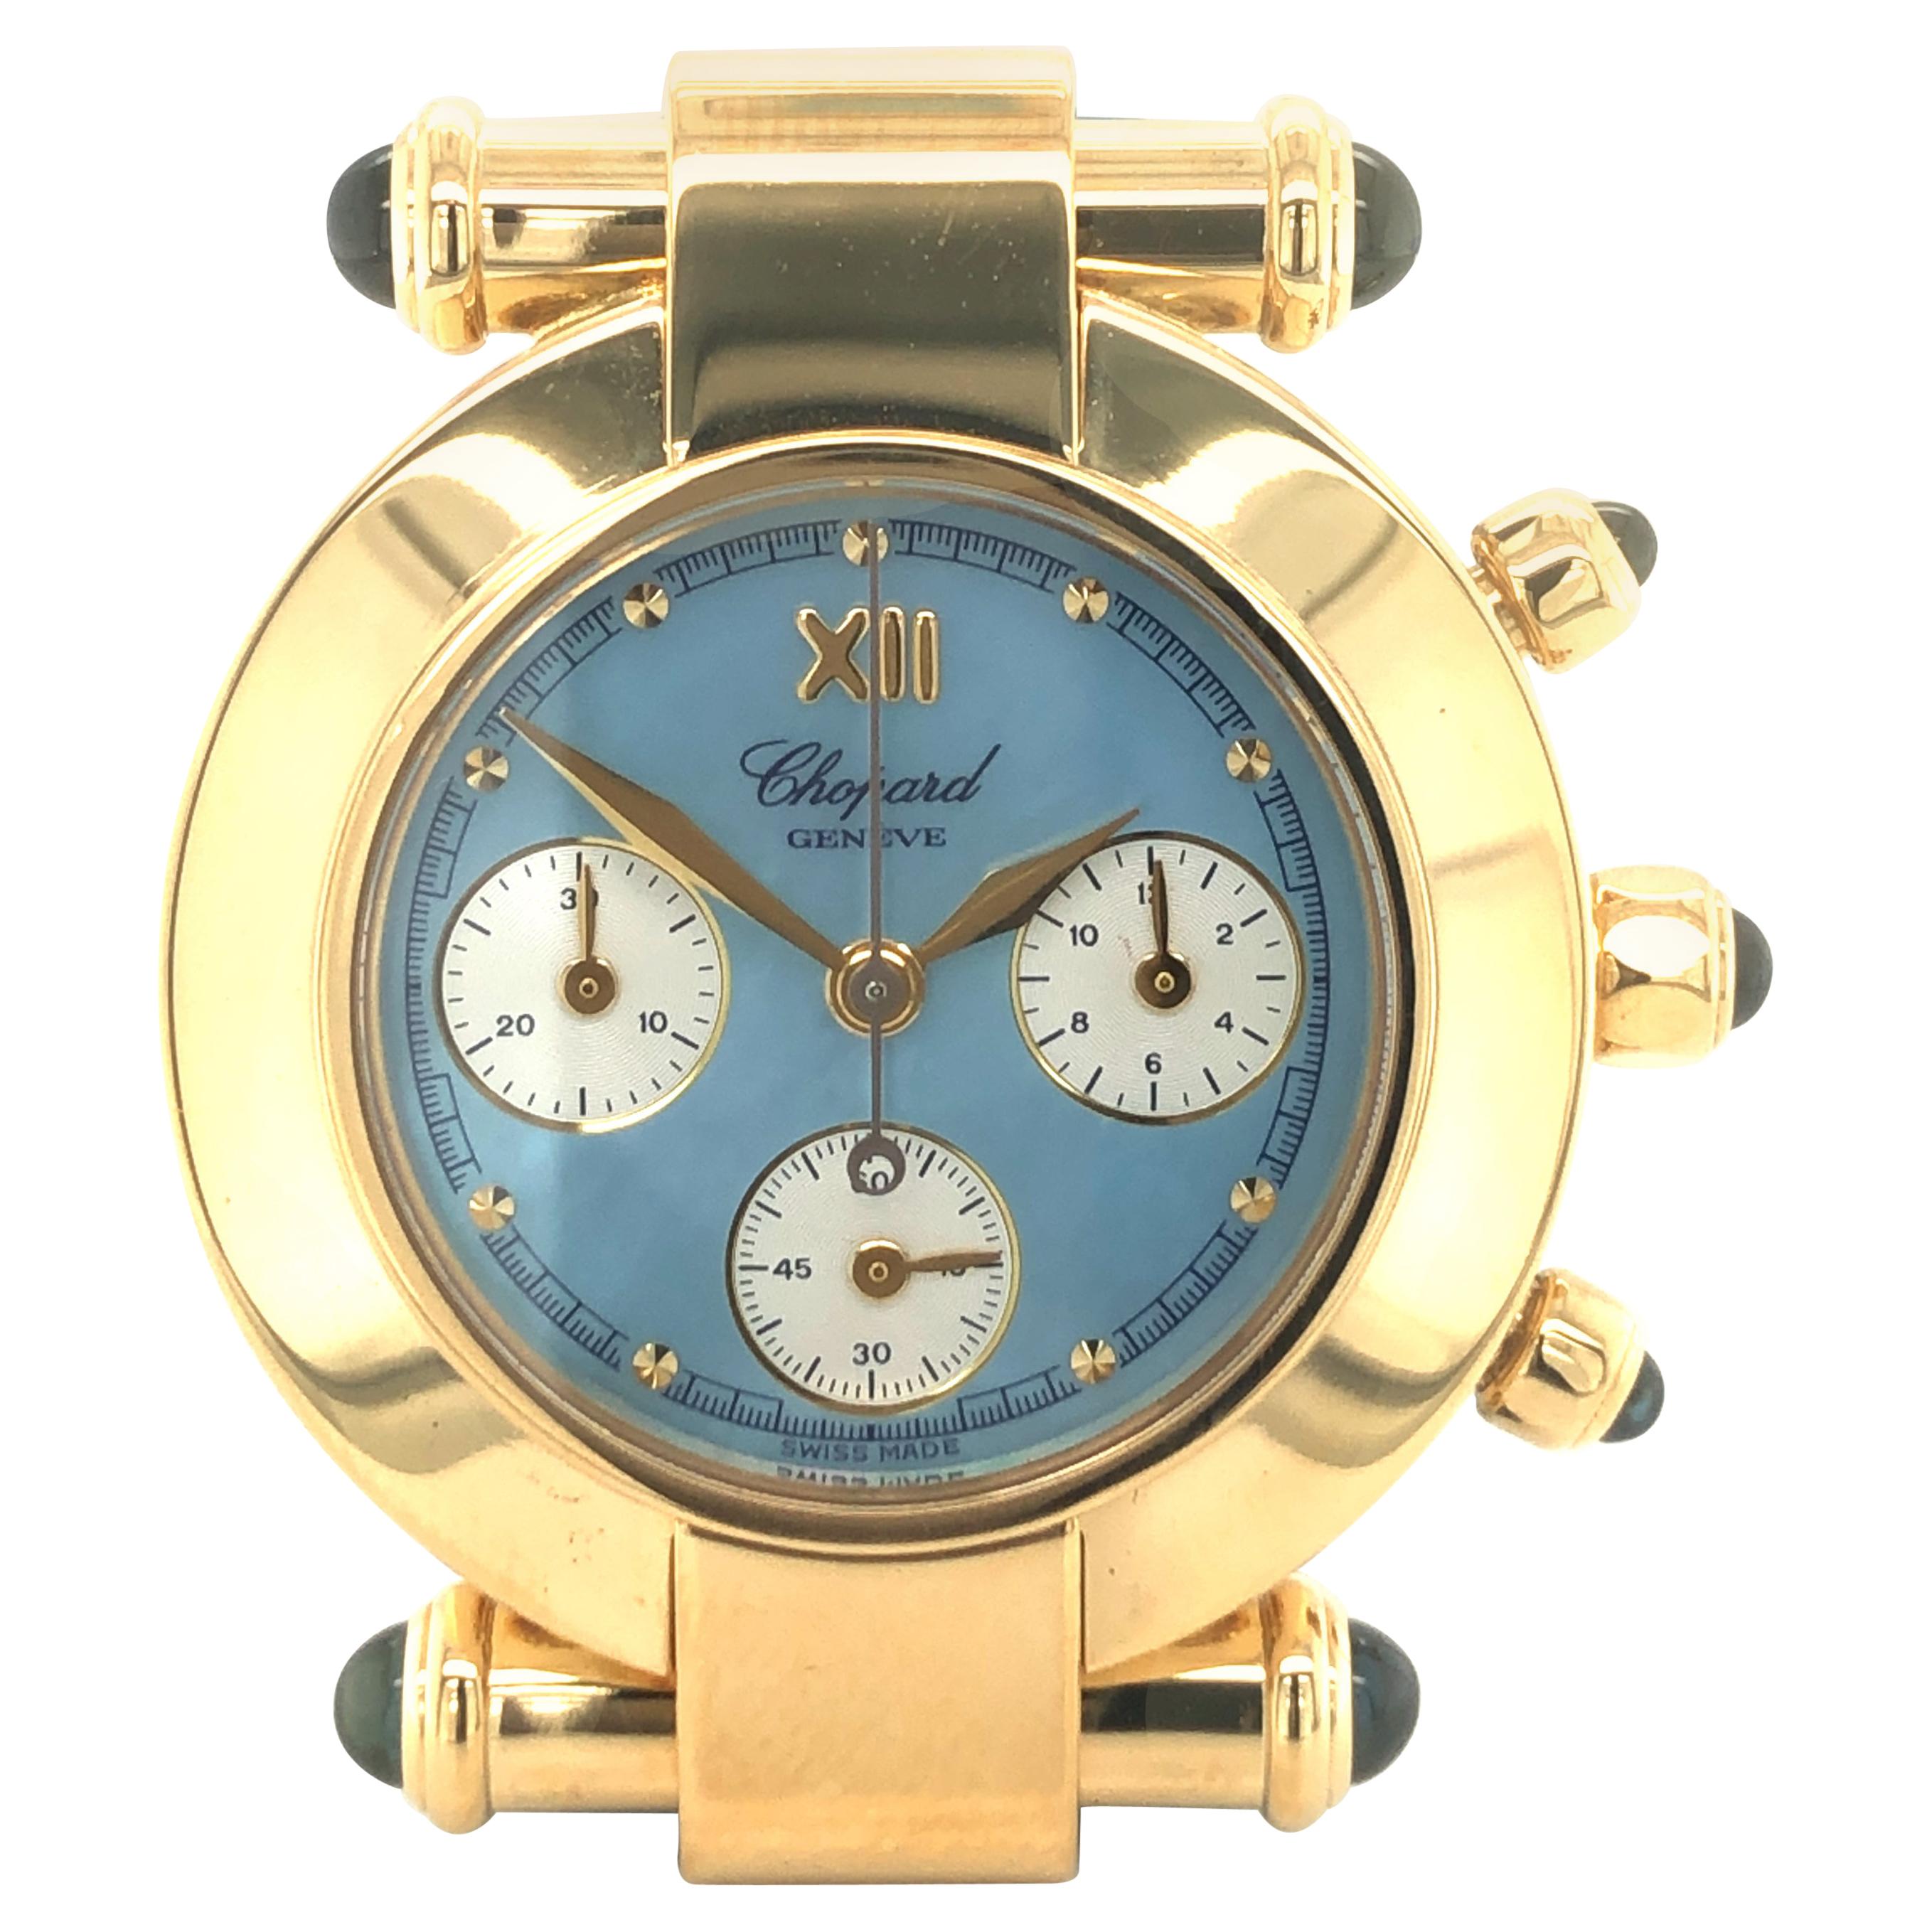 Chopard Imperiale Ladies Watch Chronograph in 18K Yellow Gold